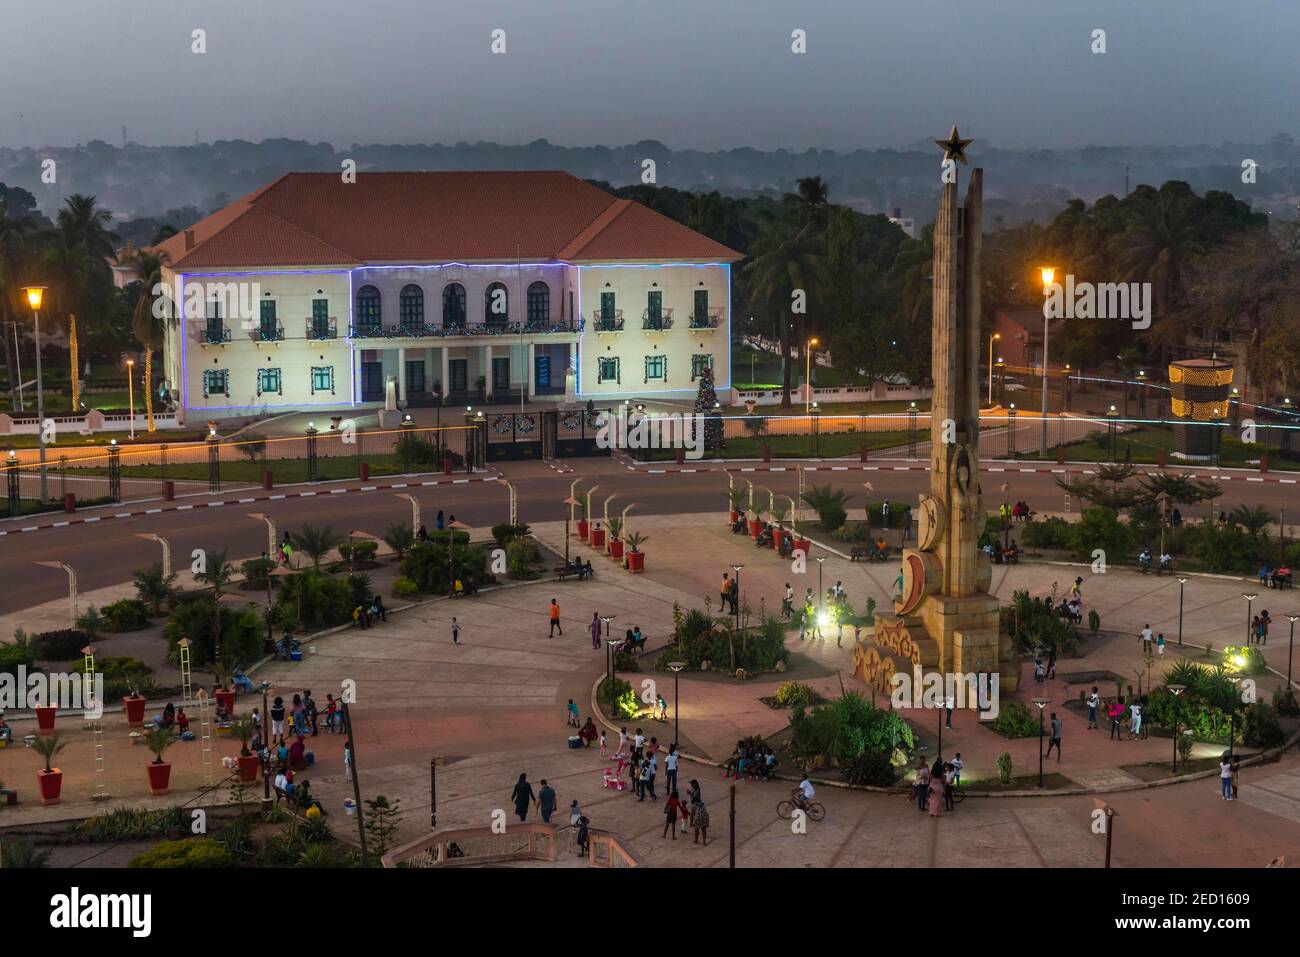 Overlook over the Empire square at nightime, Bissau, Guinea Bissau Stock Photo